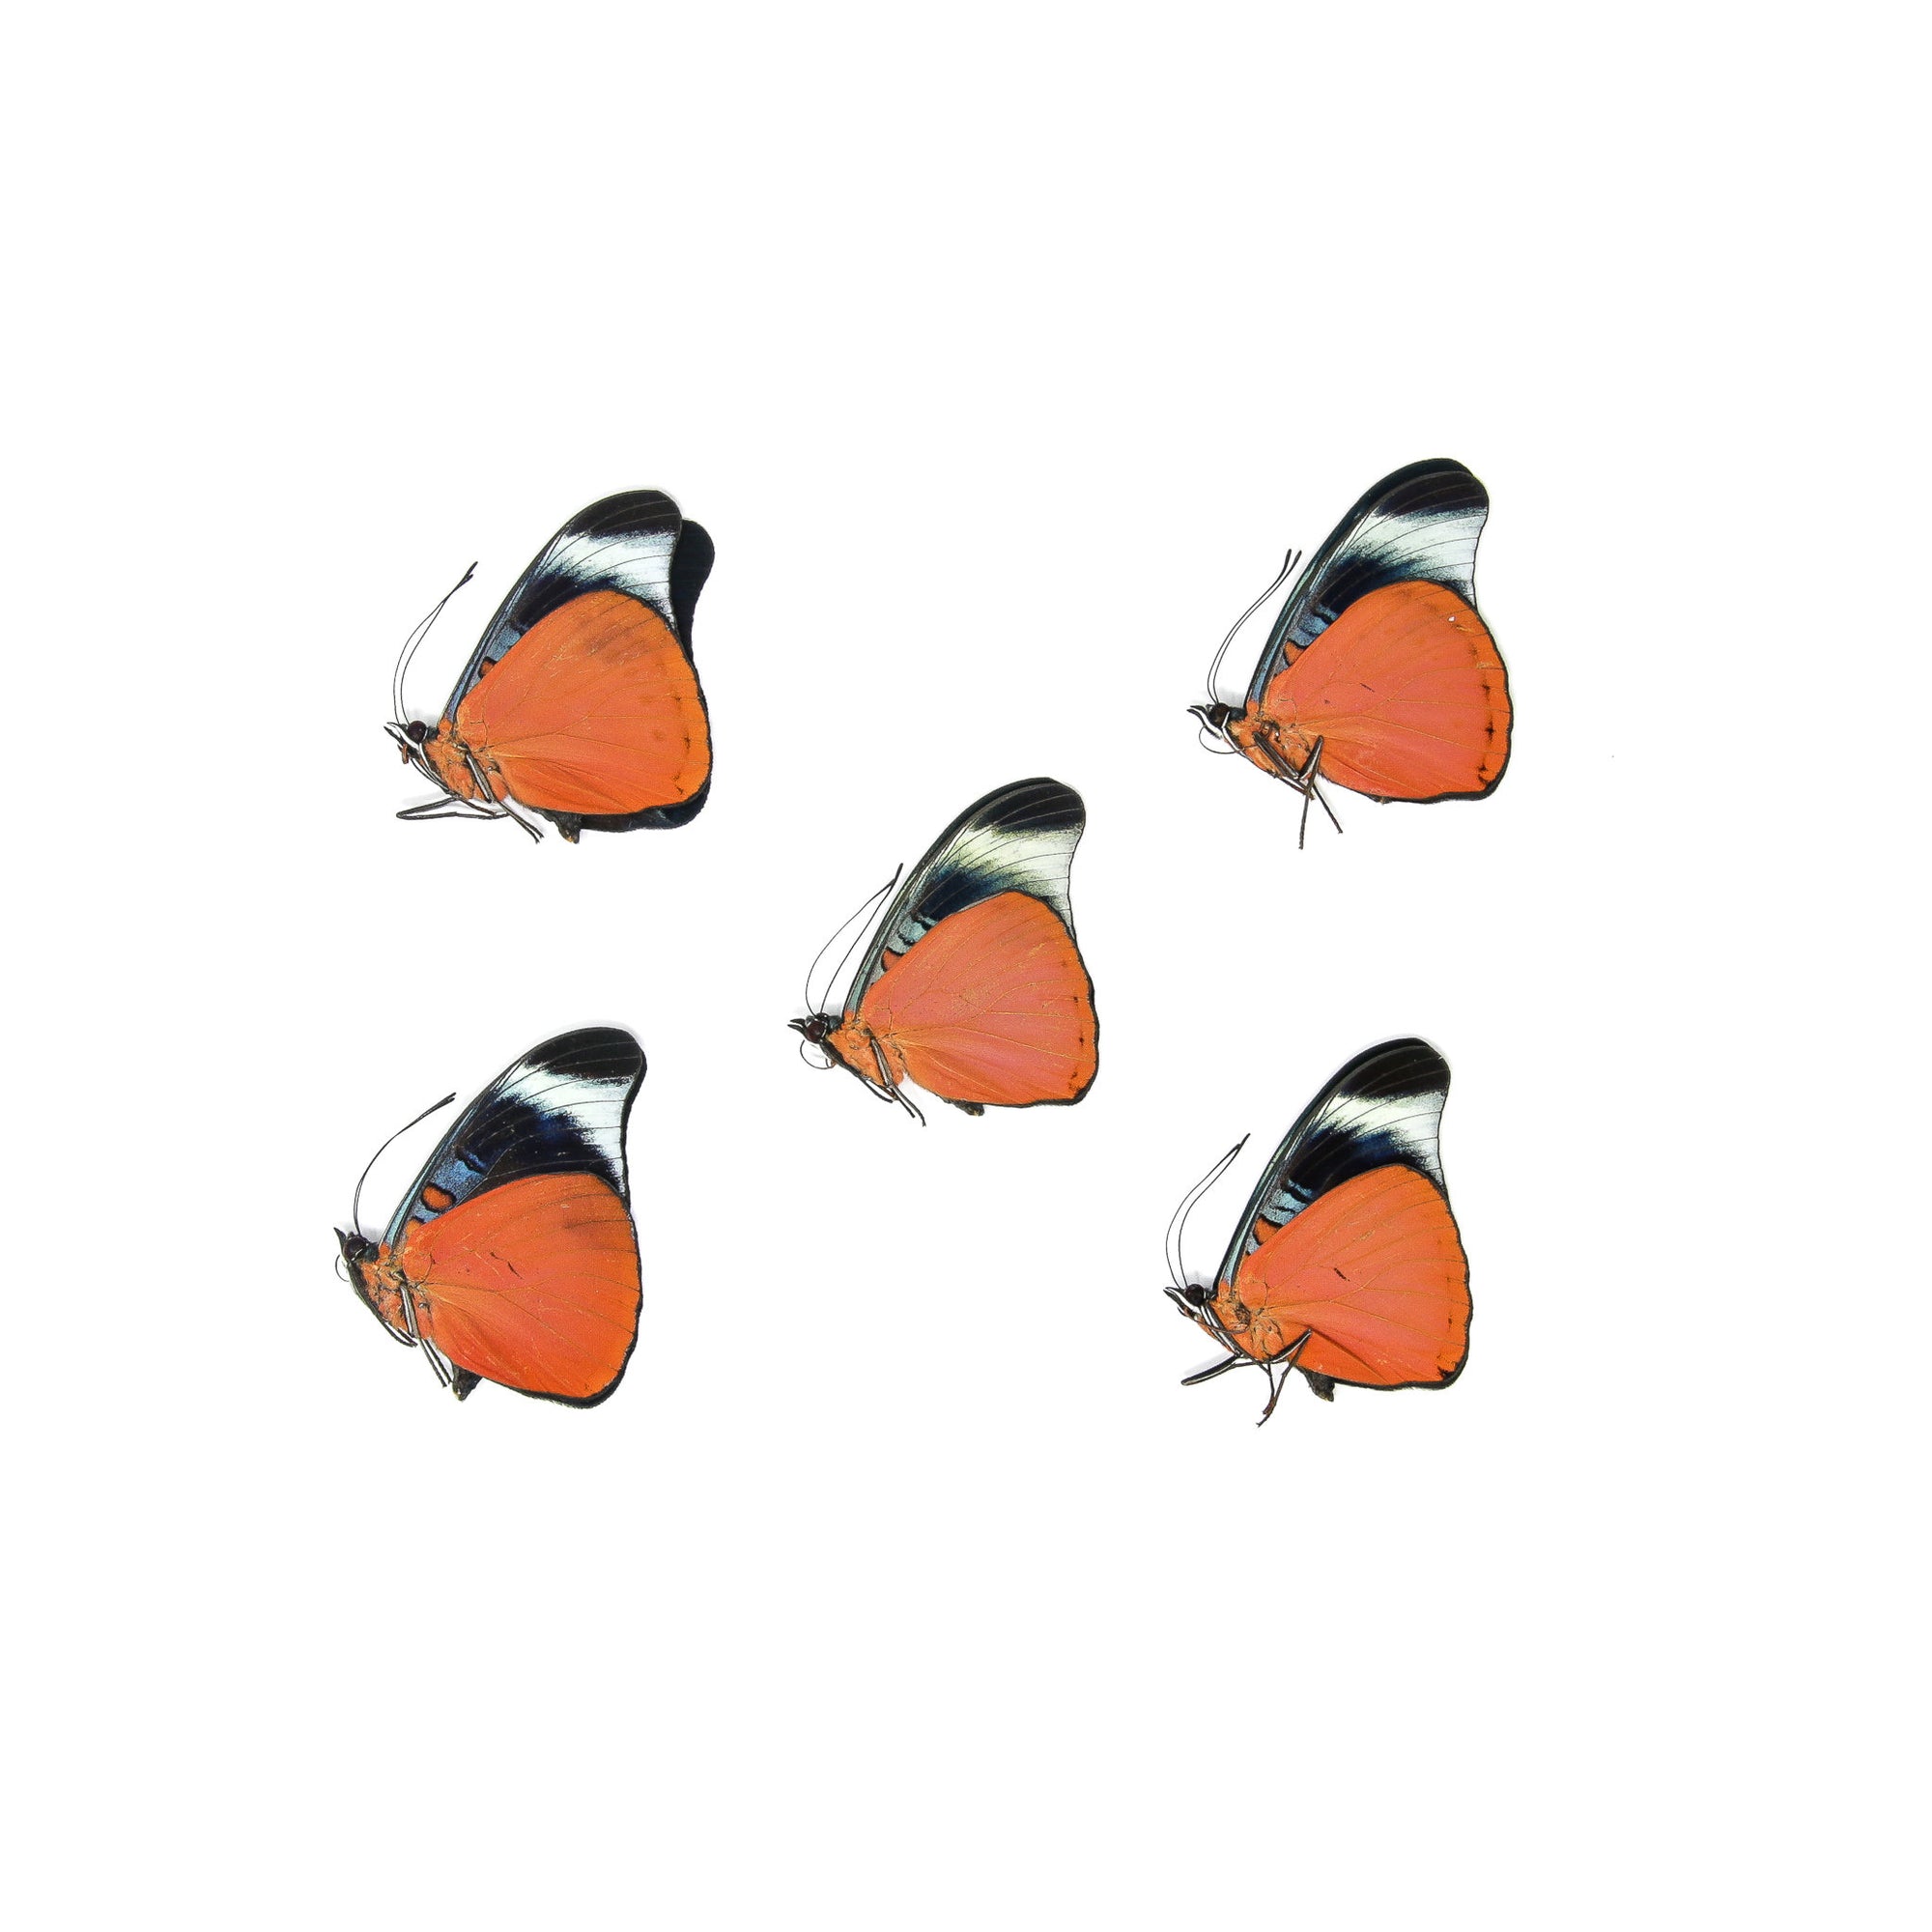 5 x Red Flasher Butterflies | Panacea prola | A1 Unmounted Specimens